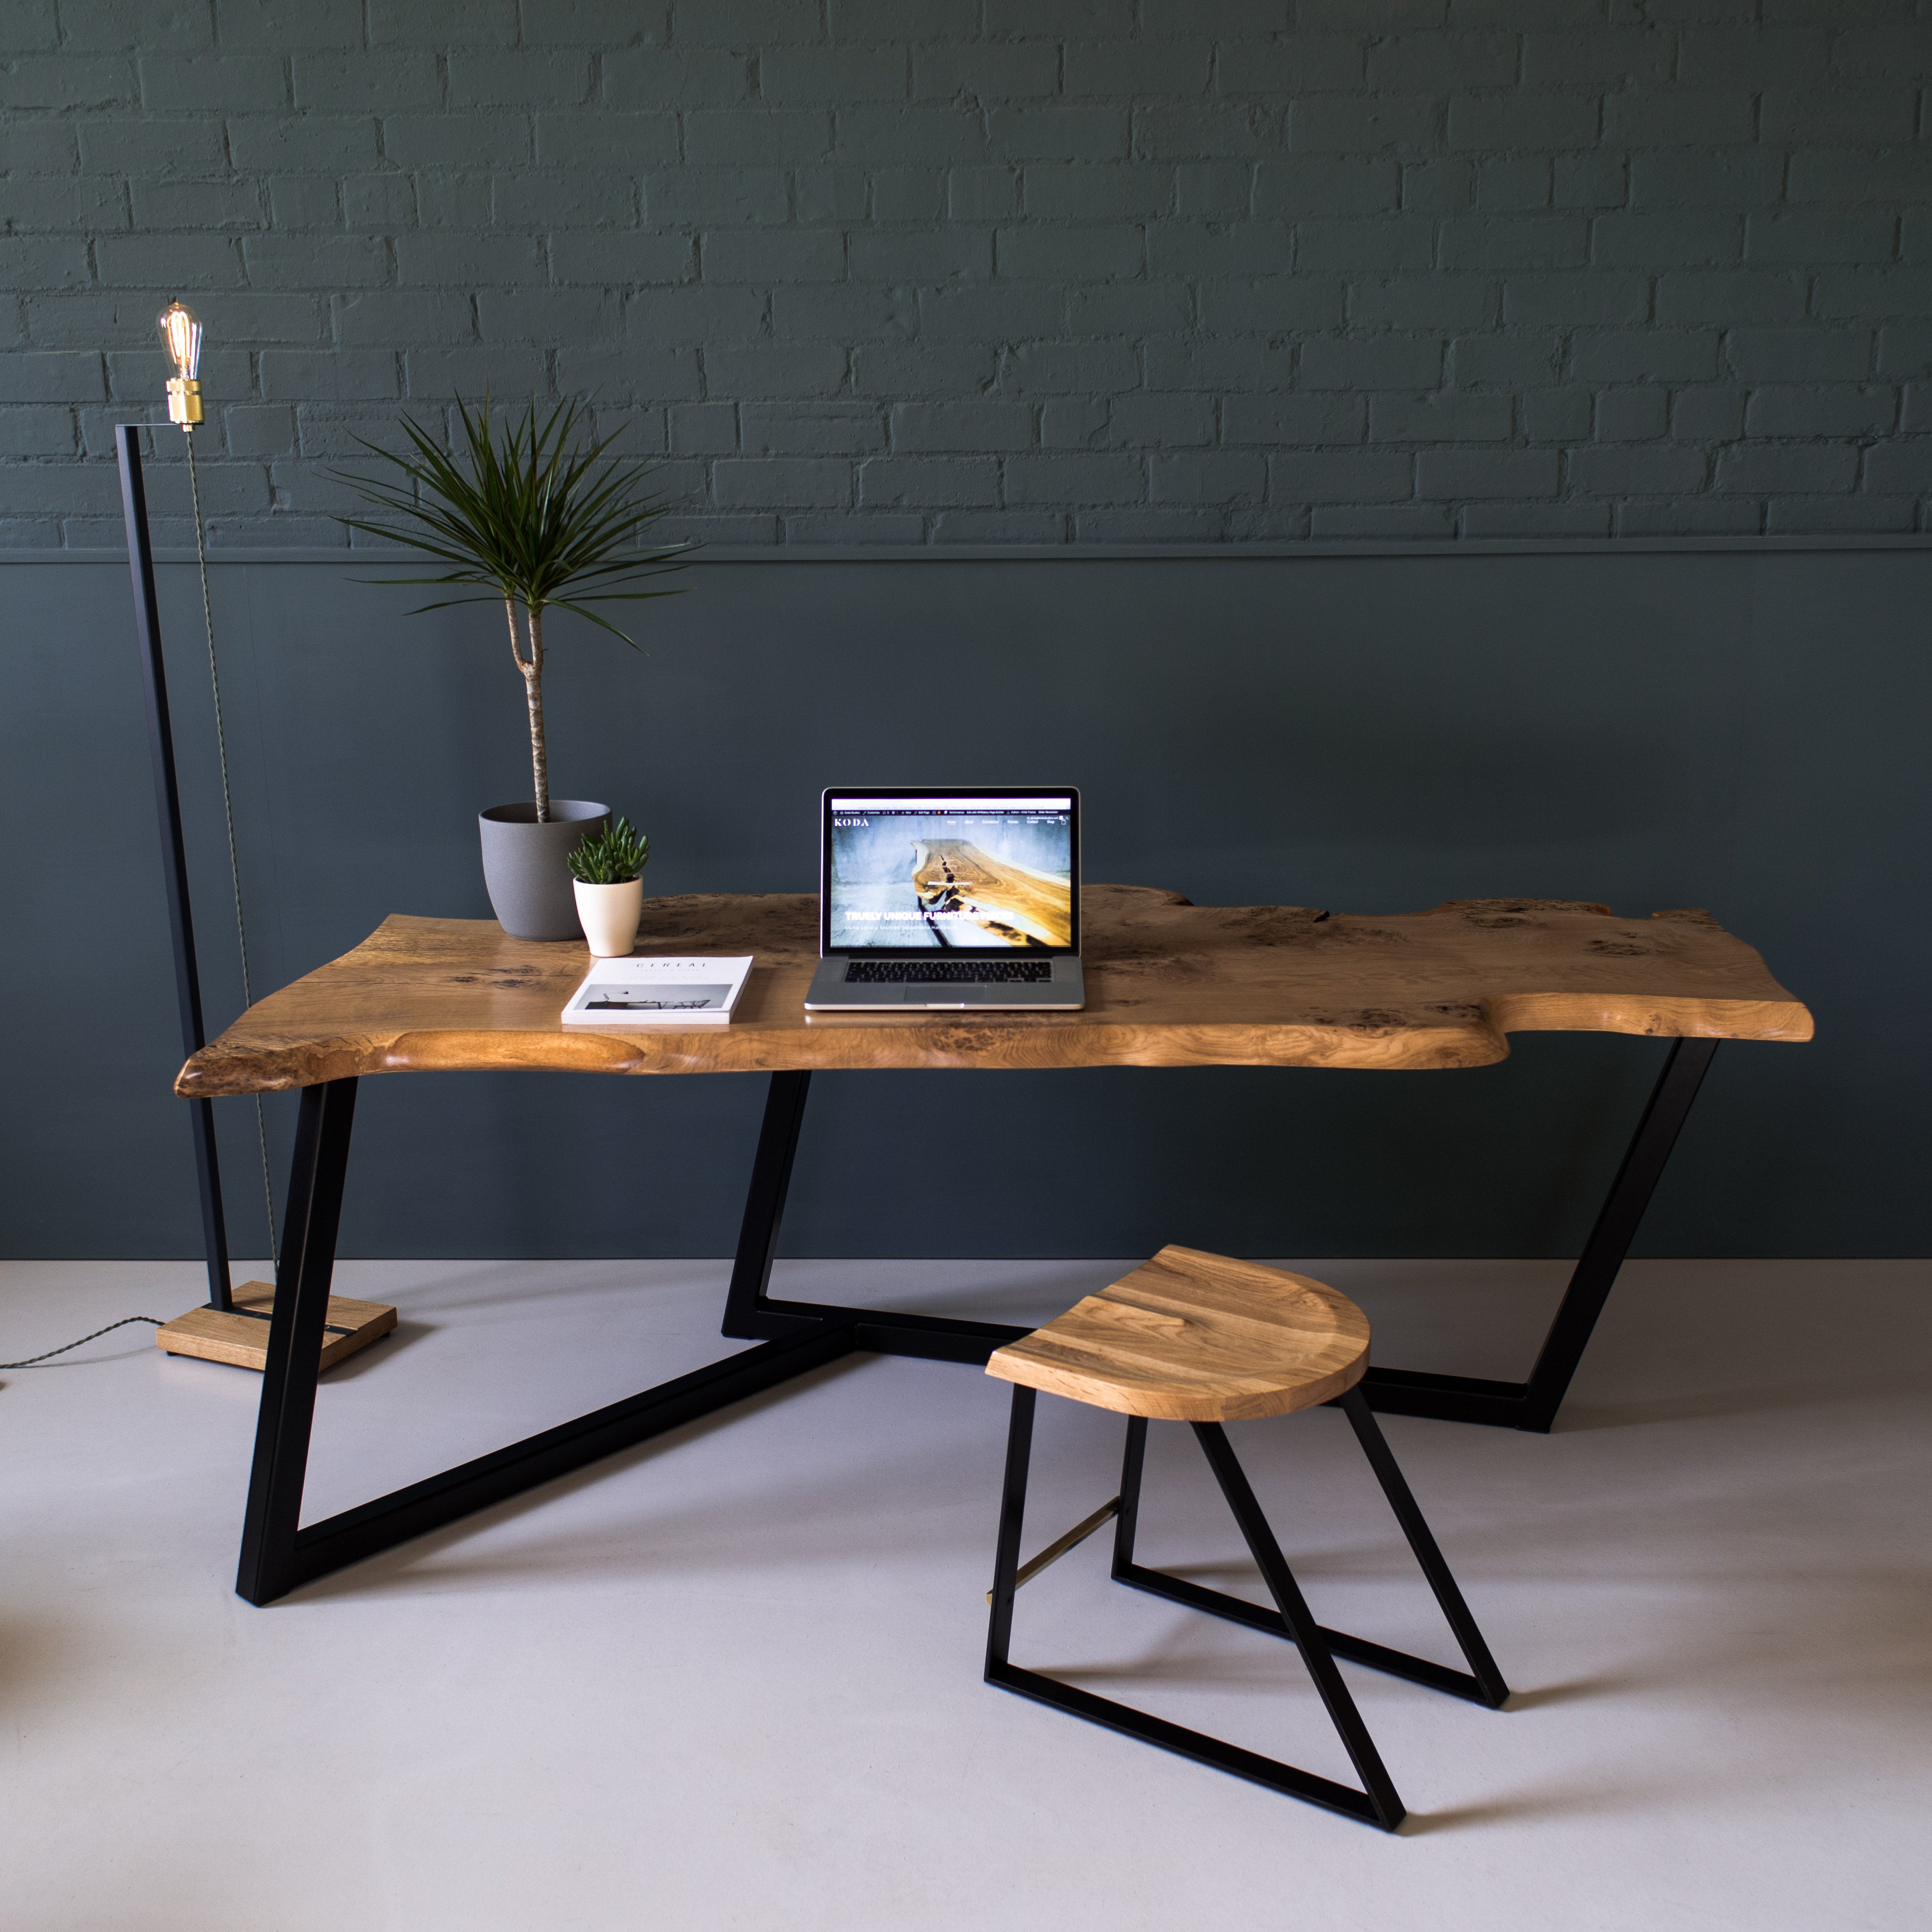 An image of the Waney Oak Table, Tai product available from Koda Studios